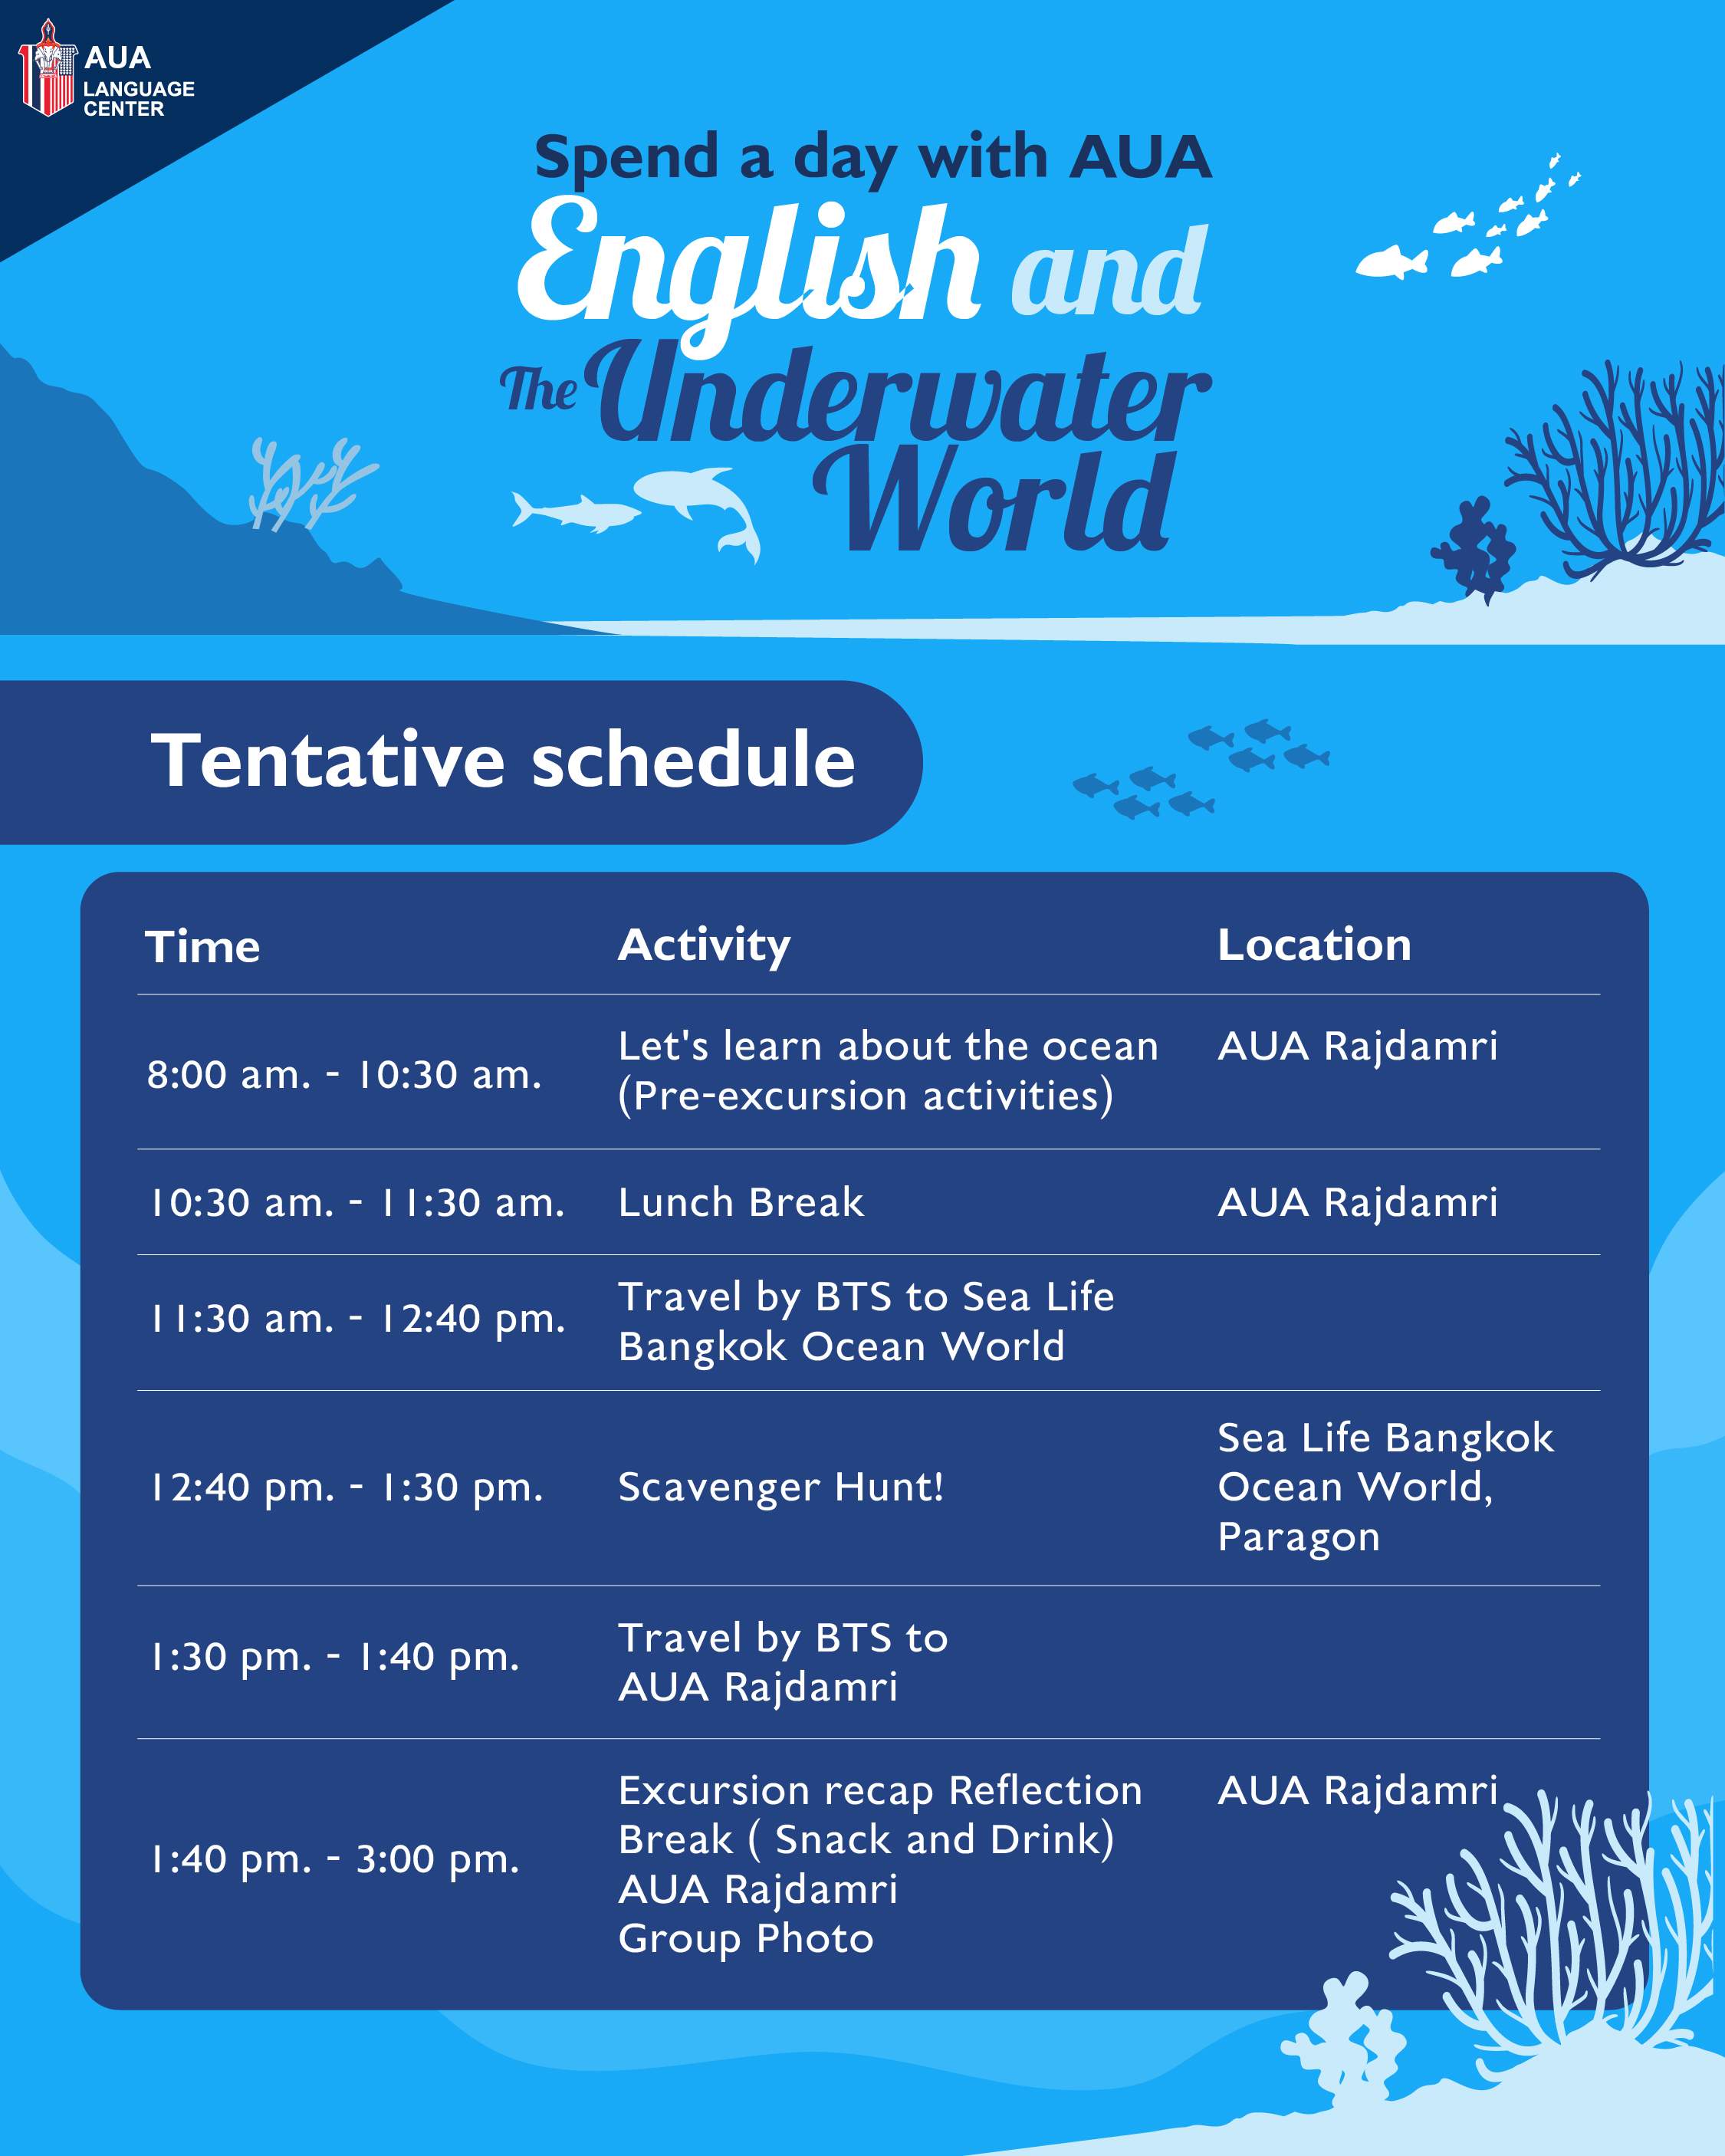 Spend a day with AUA: English and The Underwater World